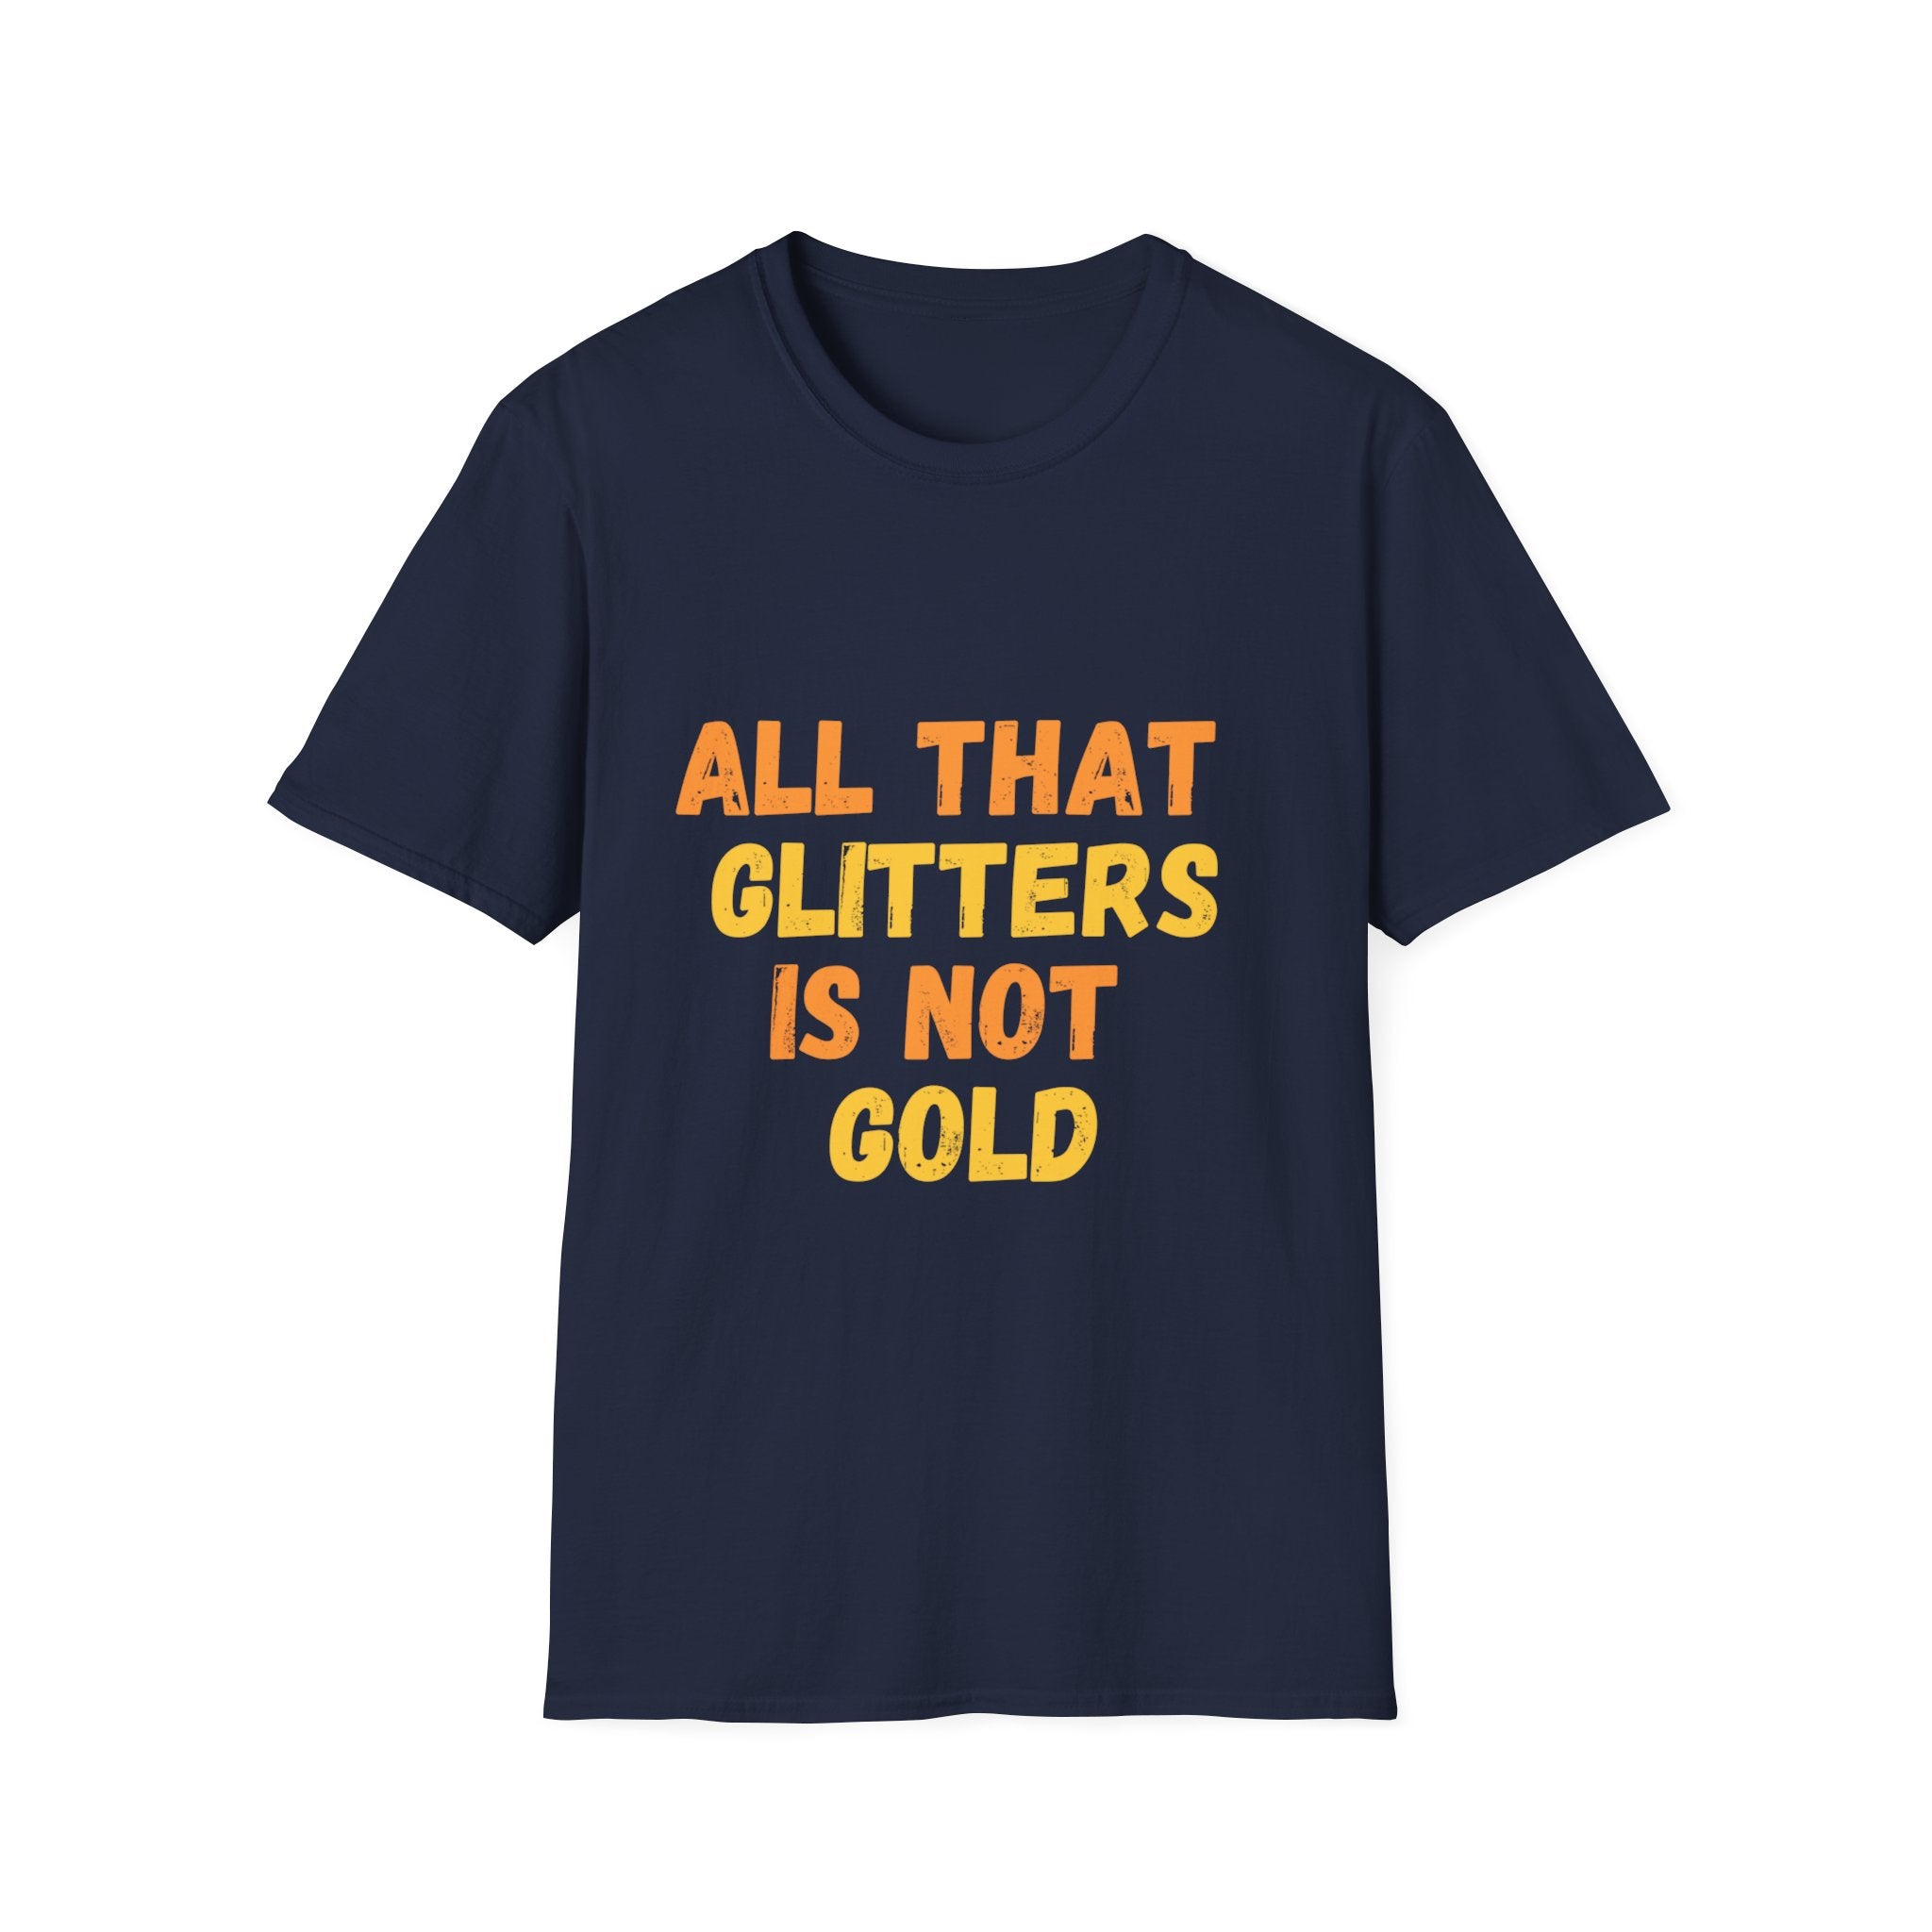 All That Glitters Is Not Gold Unisex Softstyle T-Shirt for Men, T-Shirt for Women, Gift for Women, Gift for Men